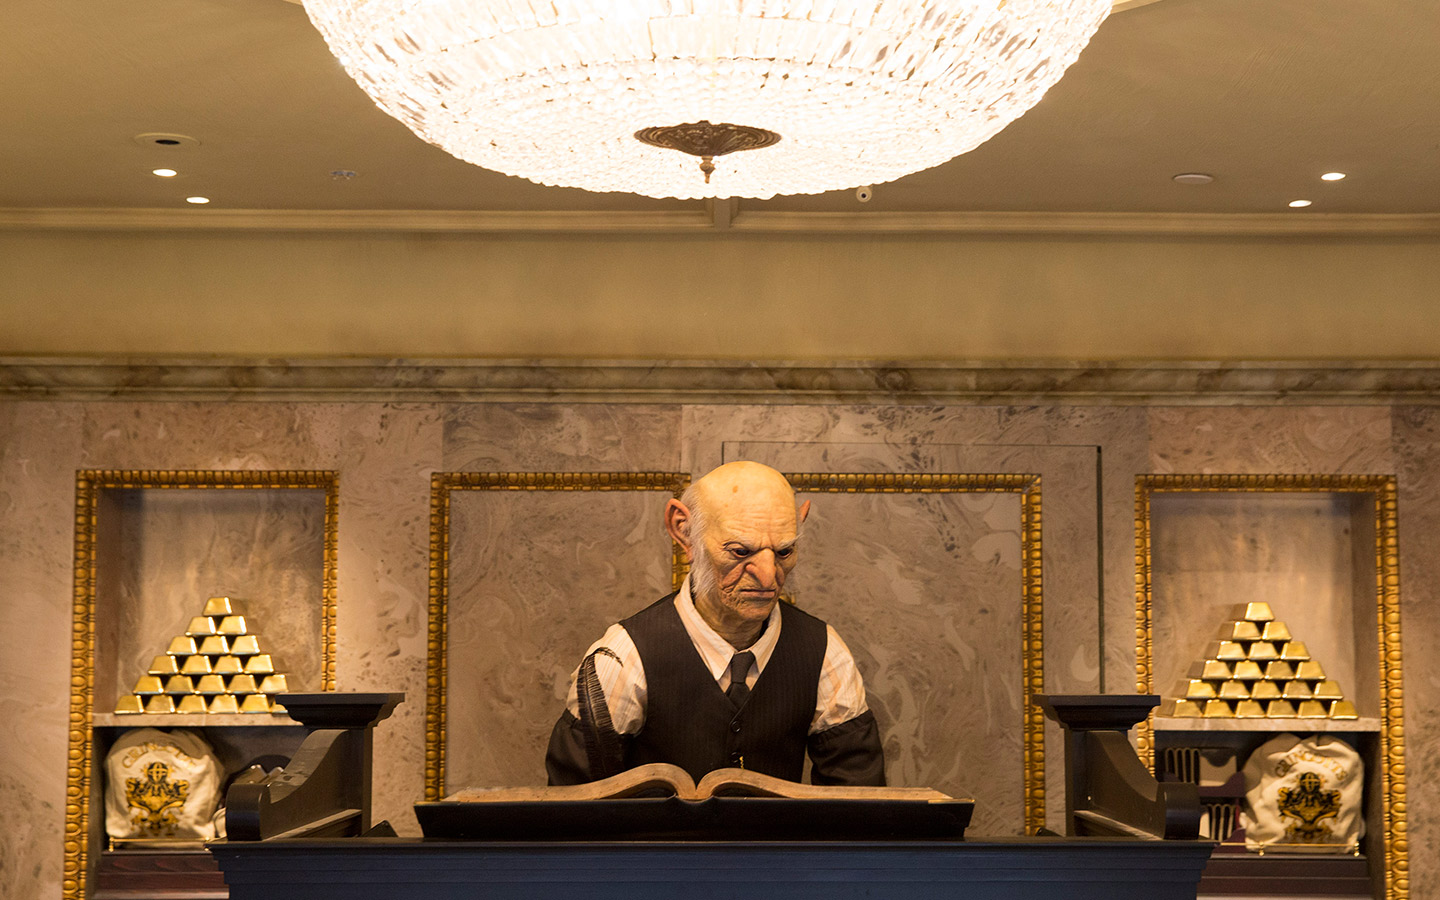 Talk to a golbin at the Gringotts Money Exchange in The Wizarding World of Harry Potter - Diagon Alley